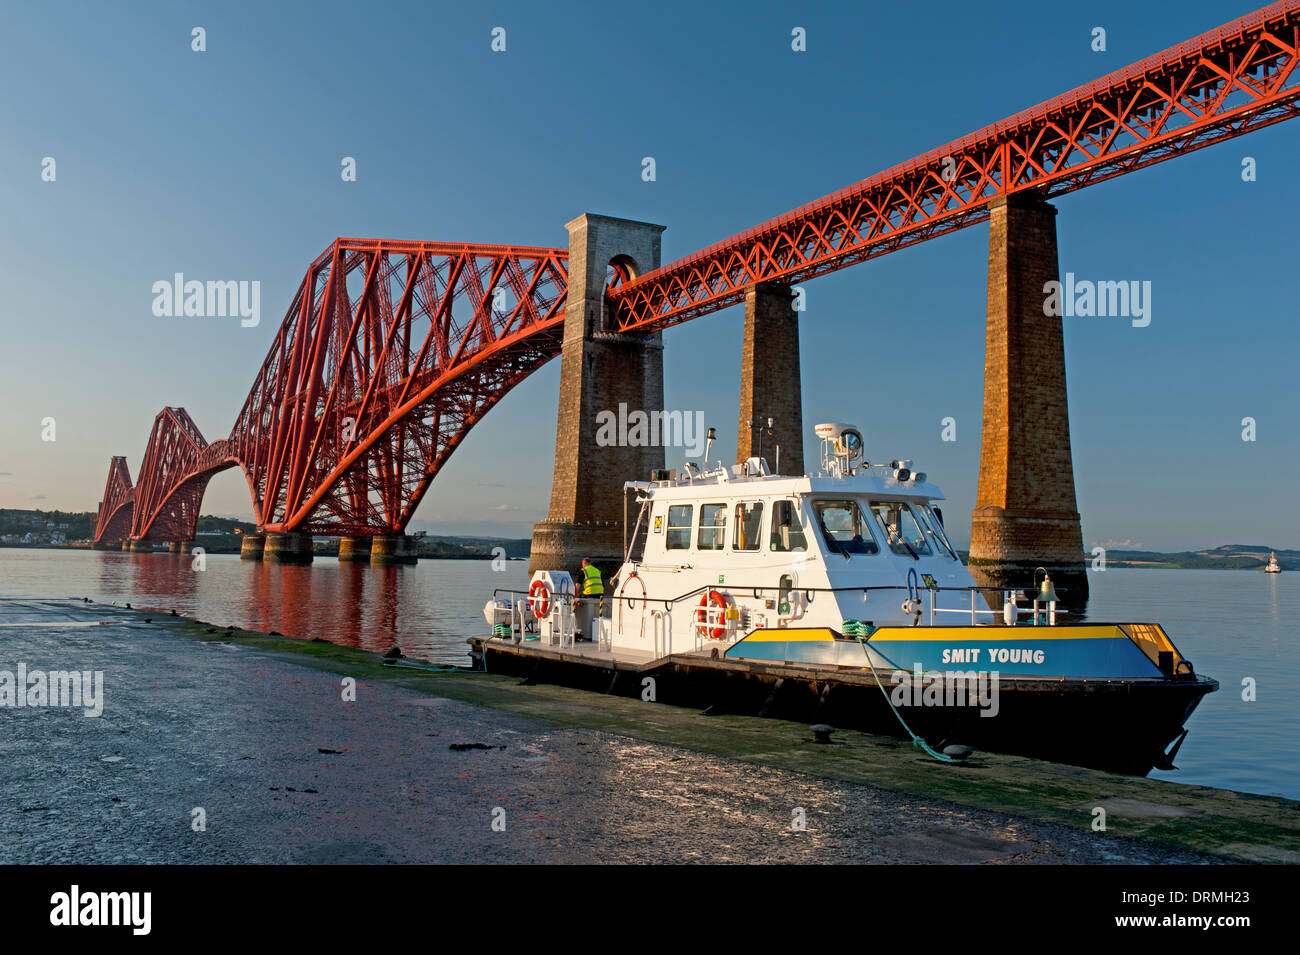 Impressive 361 feet high granite stone towers on the Firth of Forth supporting the Forth Rail Bridge.  SCO 9296. Stock Photo